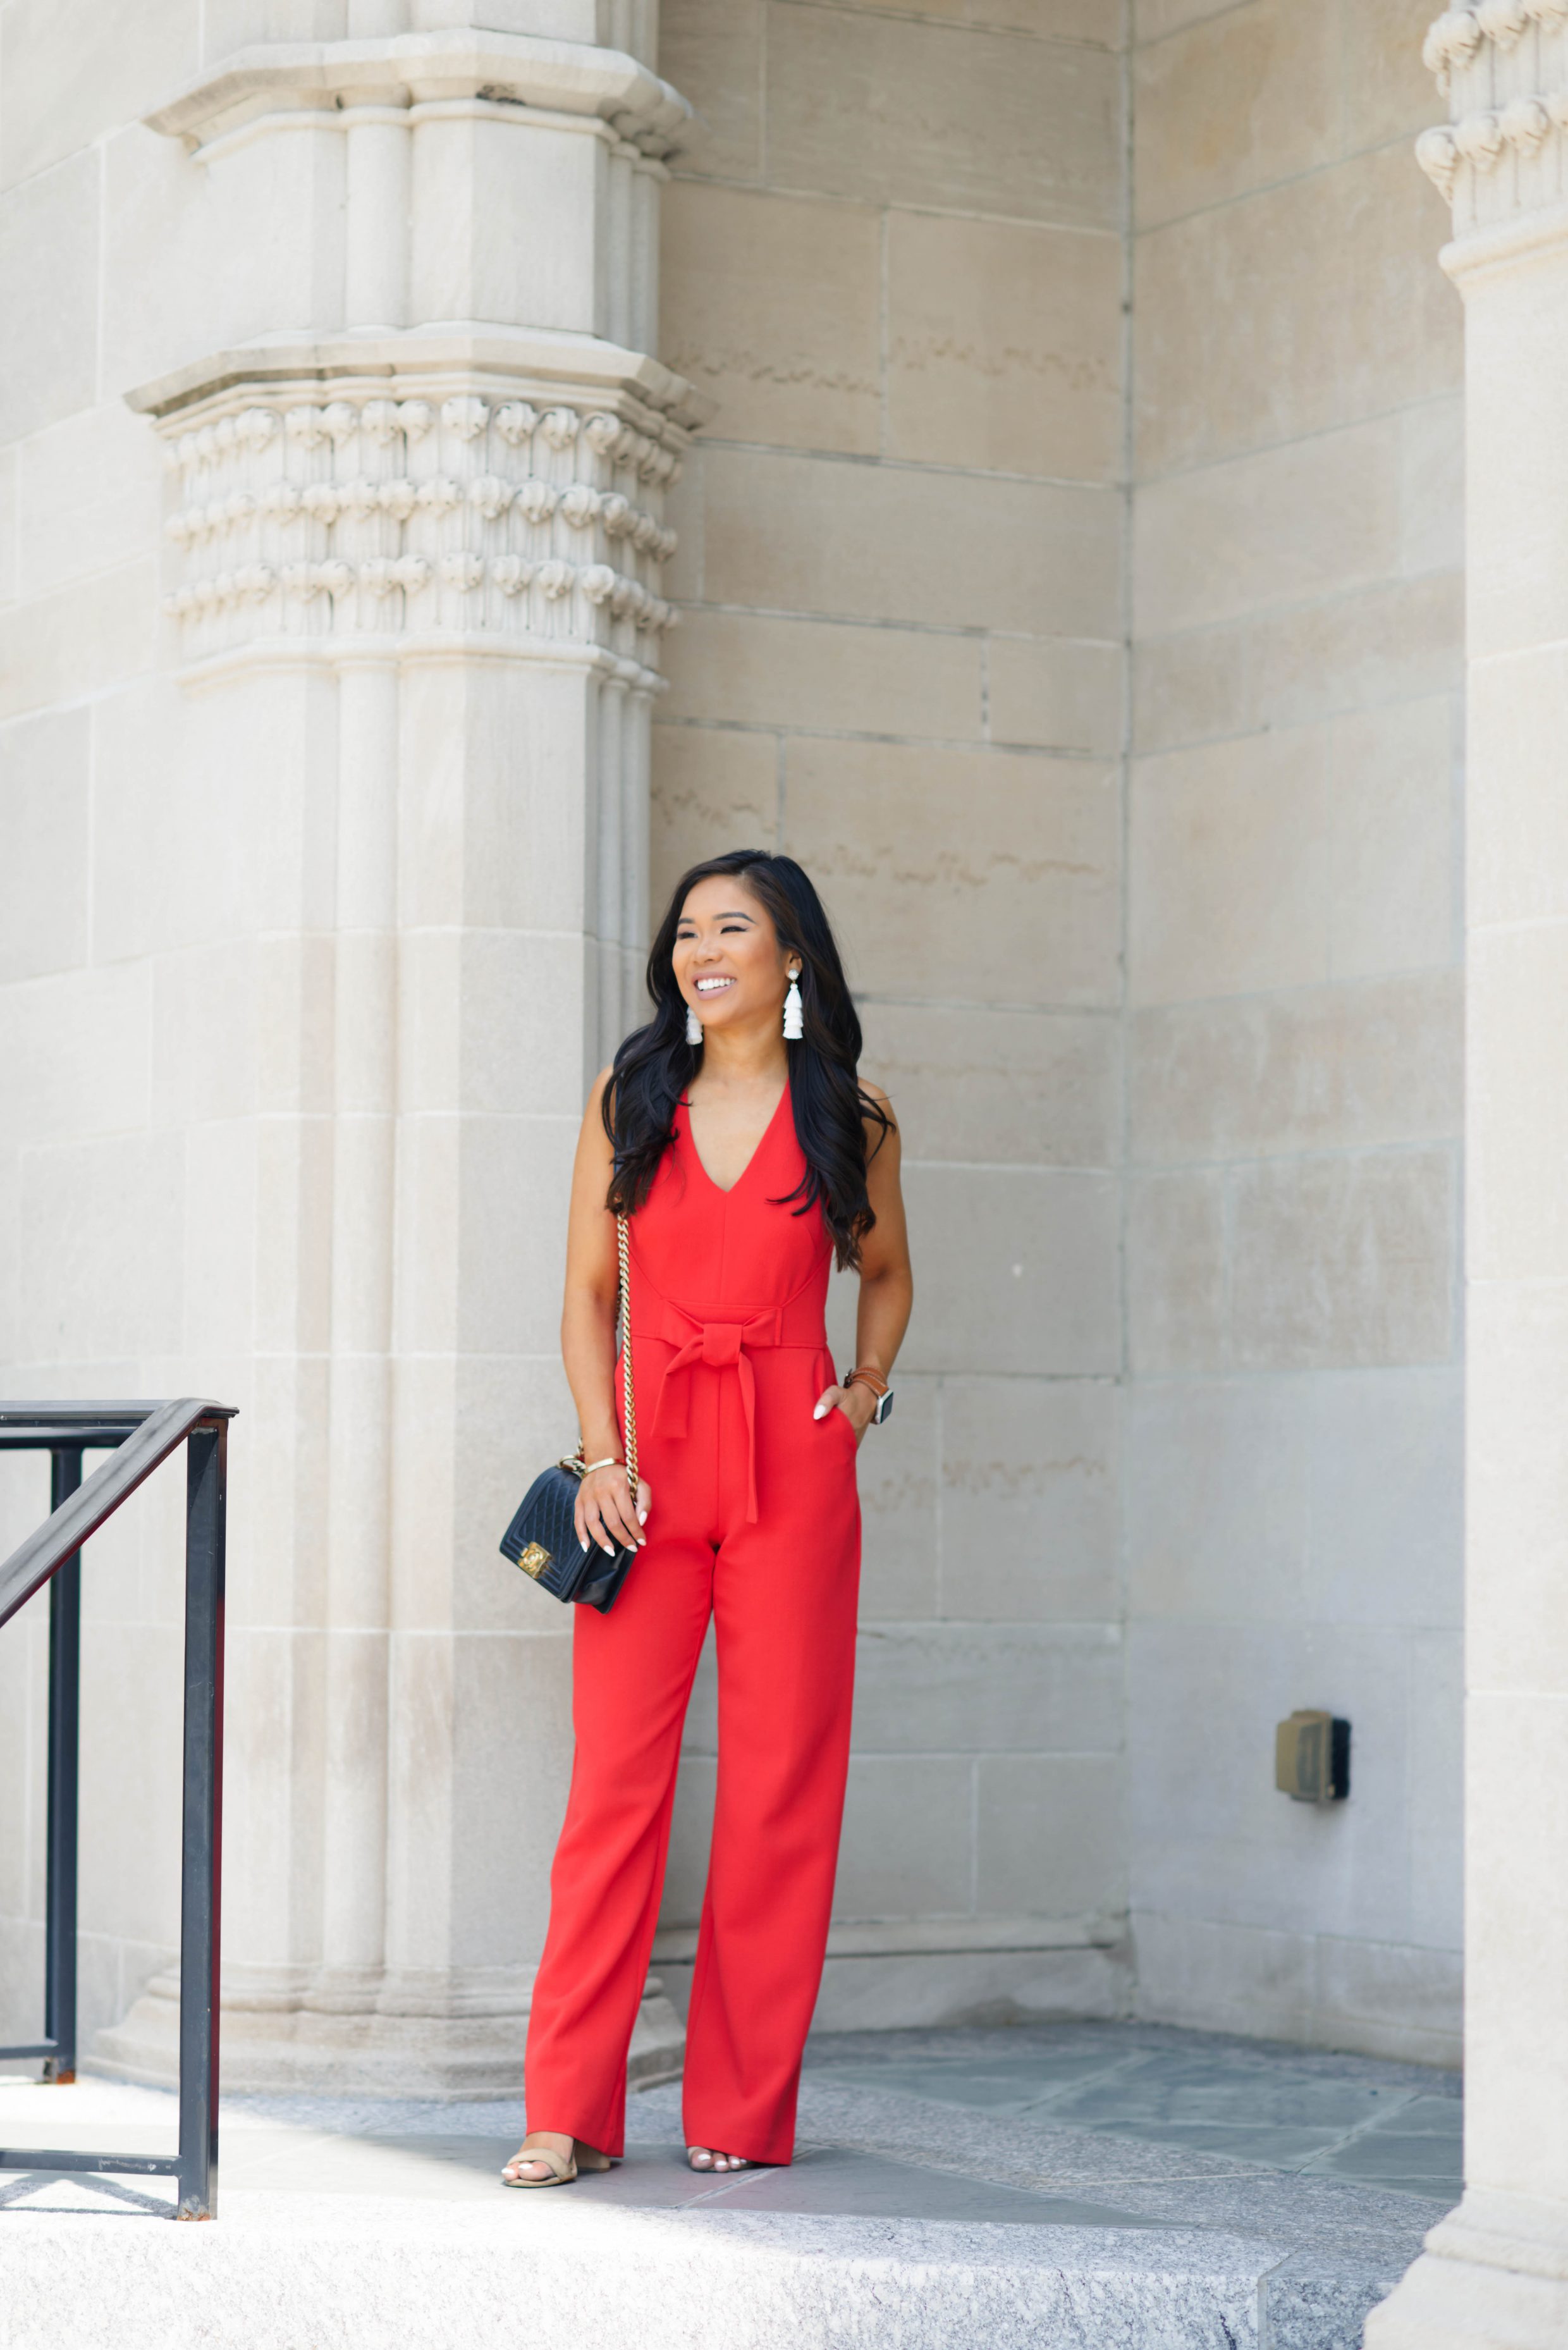 Blogger Hoang-Kim wears a red jumpsuit with pockets